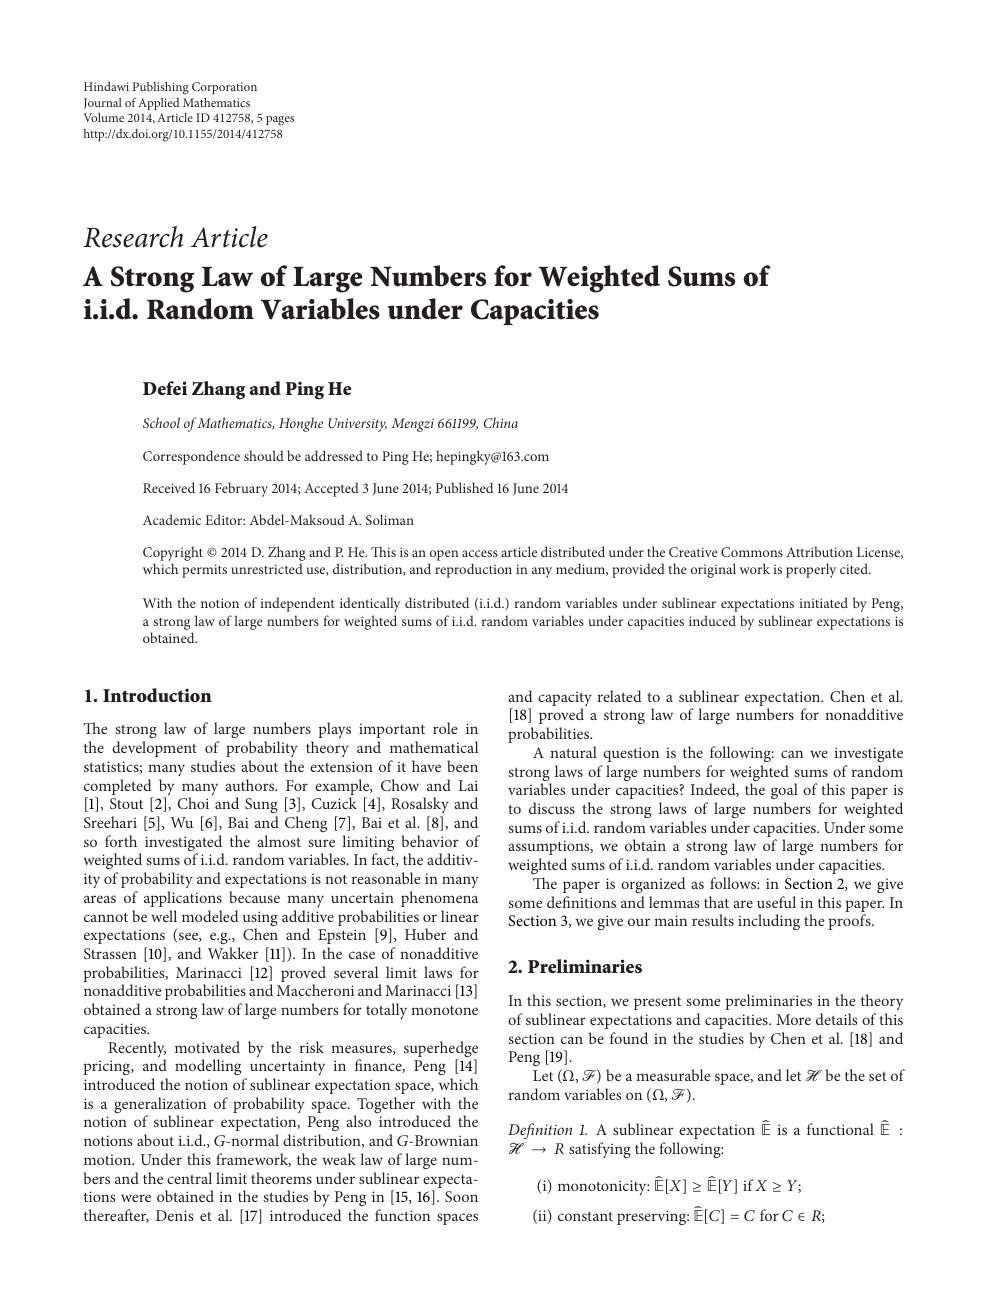 A Strong Law Of Large Numbers For Weighted Sums Of I I D Random Variables Under Capacities Topic Of Research Paper In Mathematics Download Scholarly Article Pdf And Read For Free On Cyberleninka